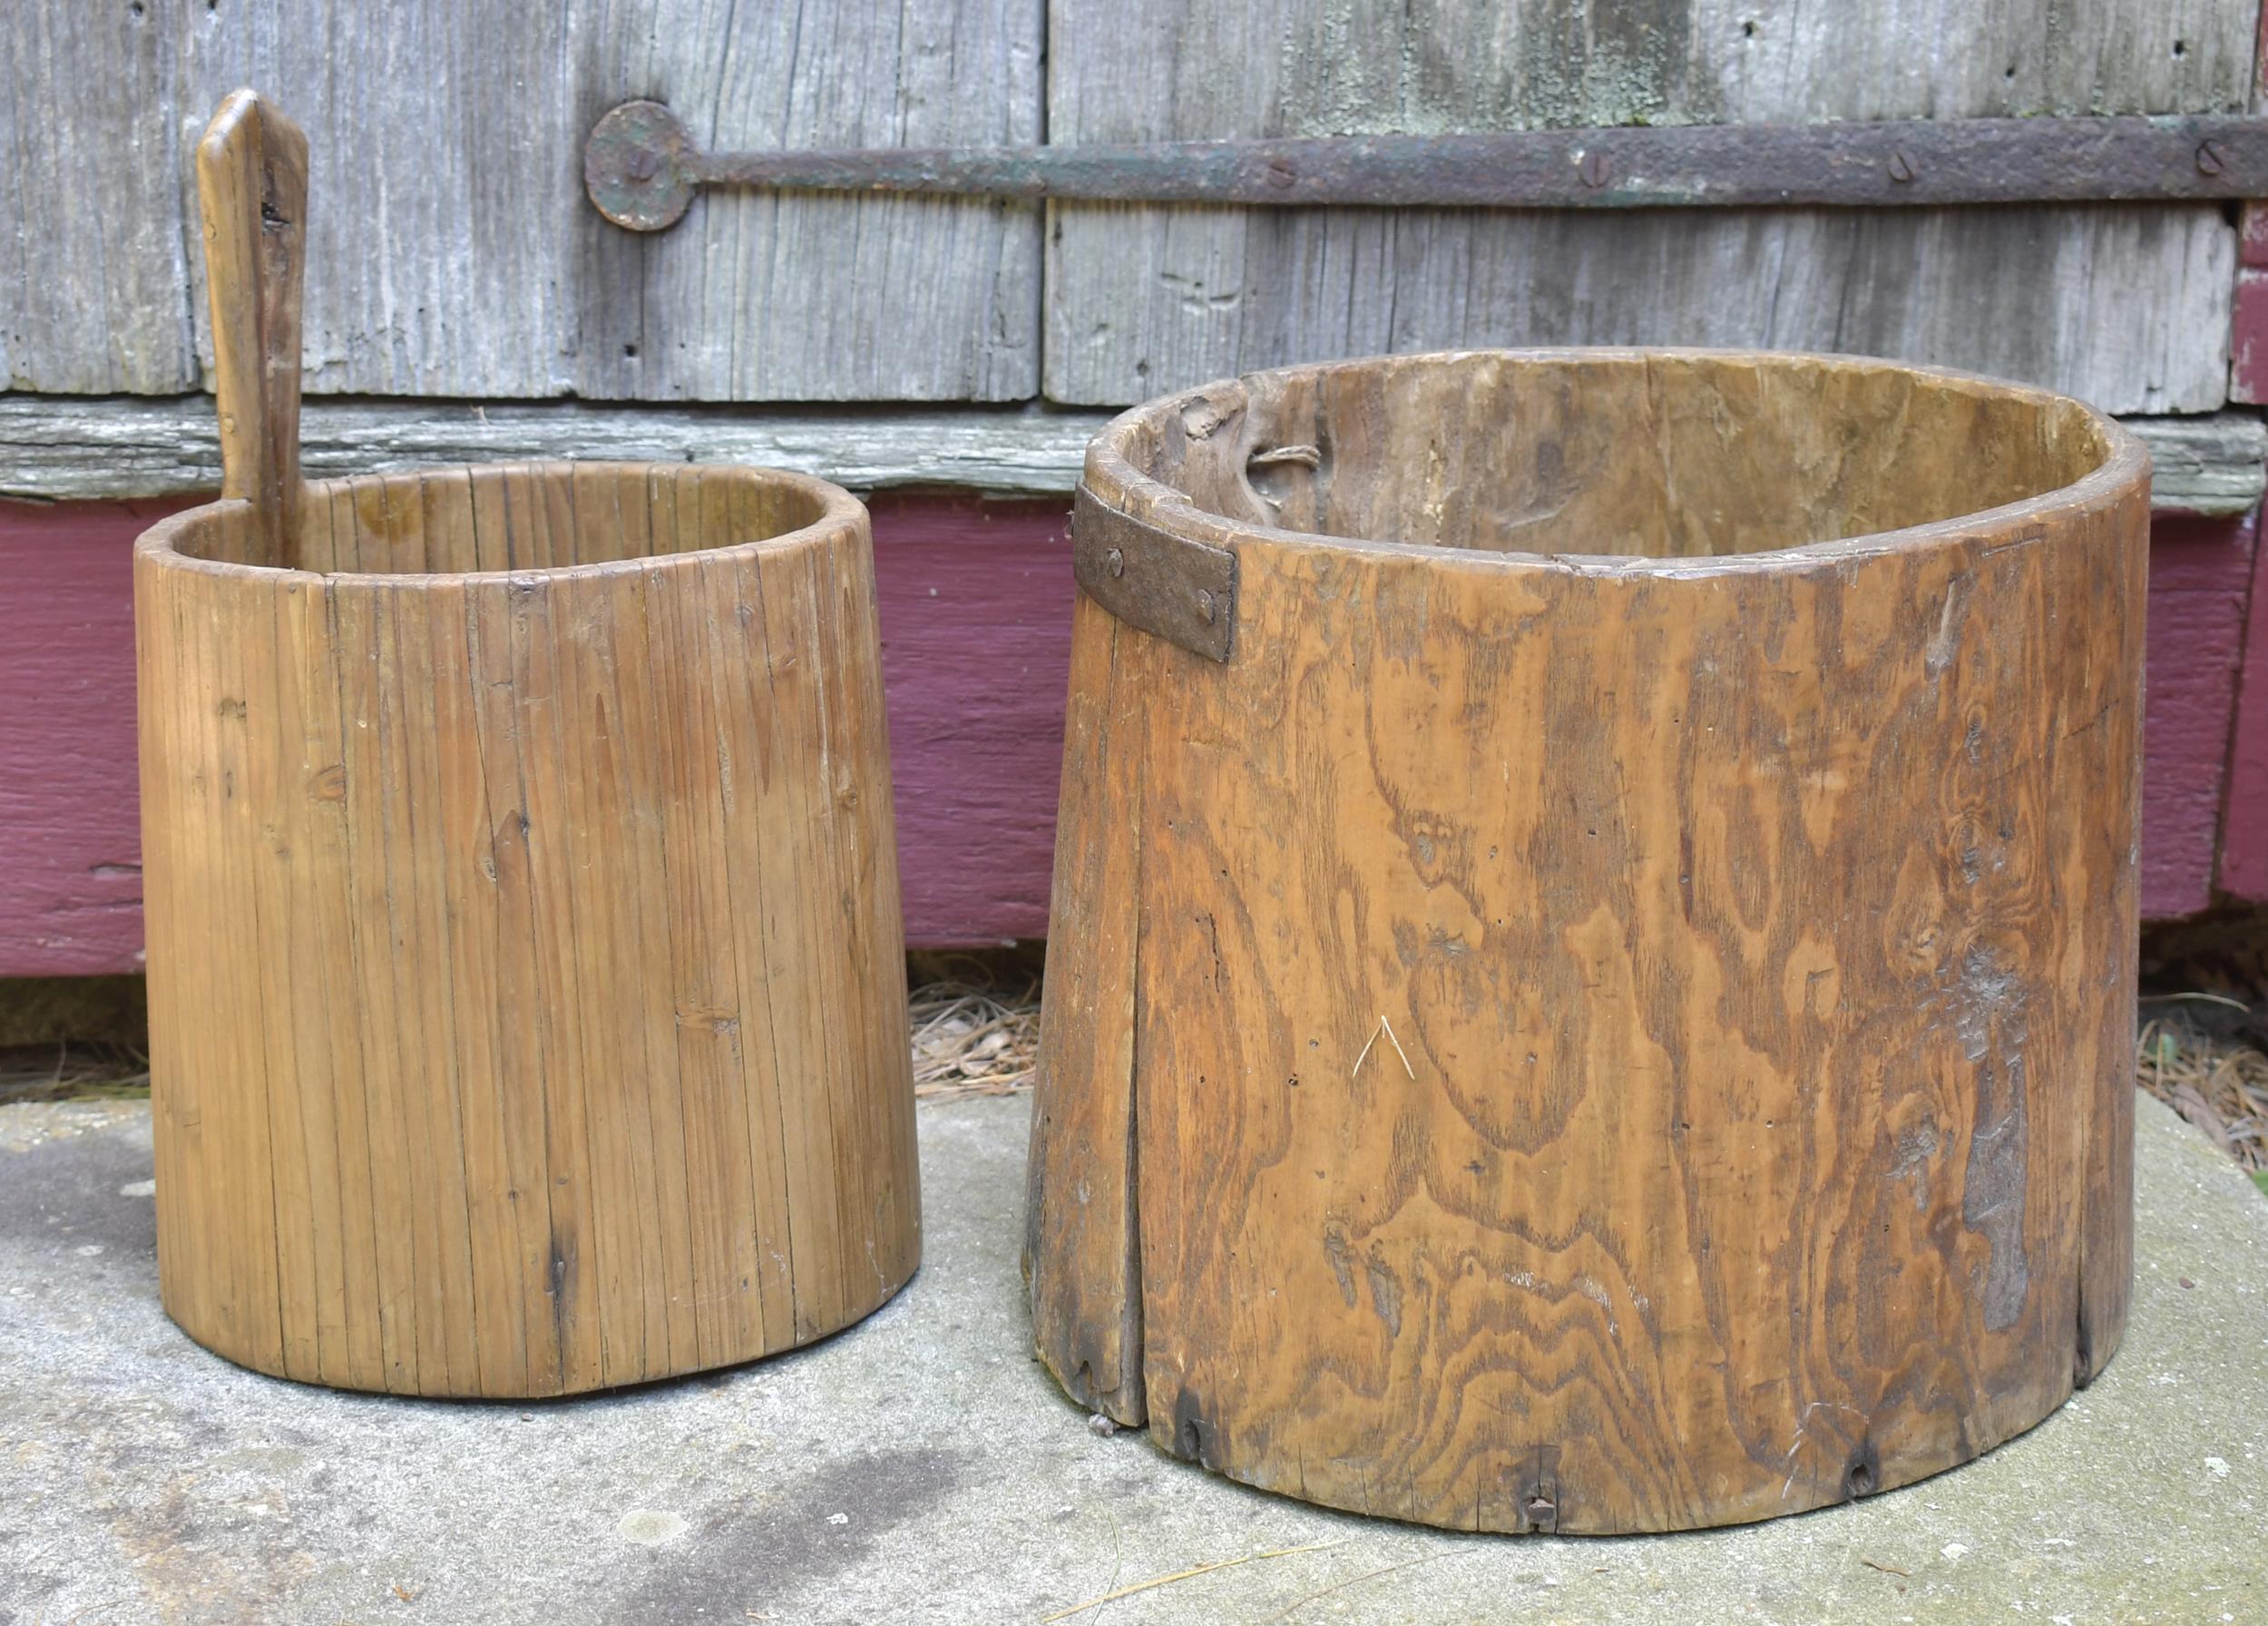 TWO EARLY WOOD BUCKETS. 18th C.